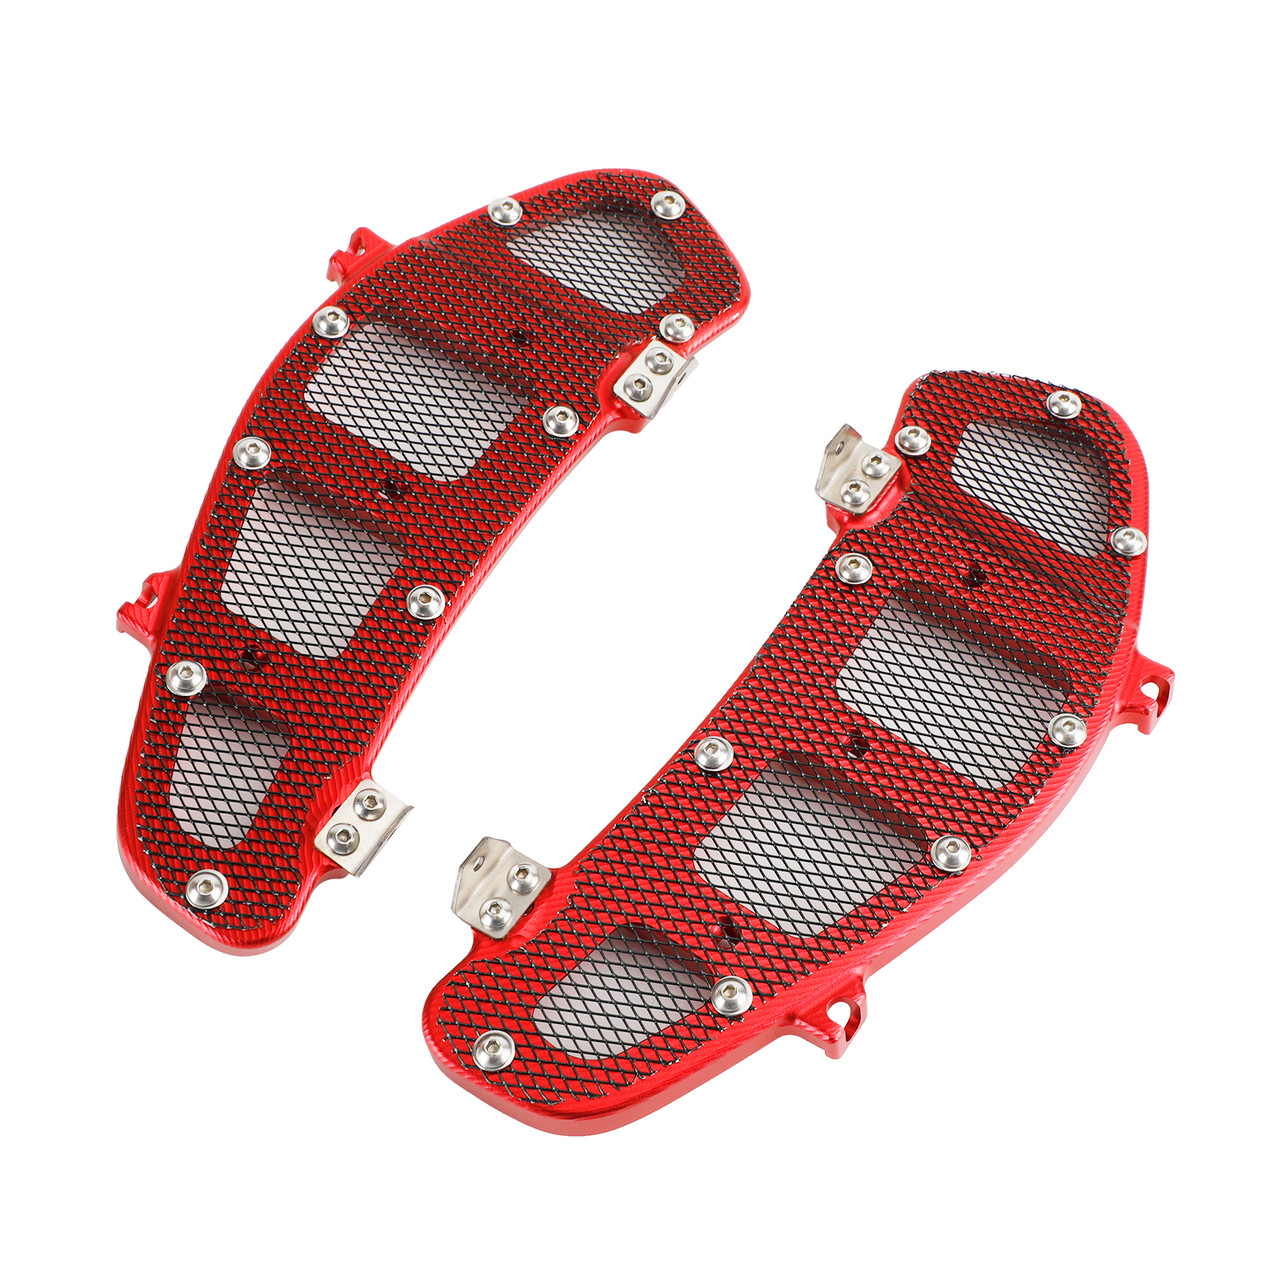 Radiator Guard Cover Radiator Protector Metal Red Fits For Vespa Gts 250 300